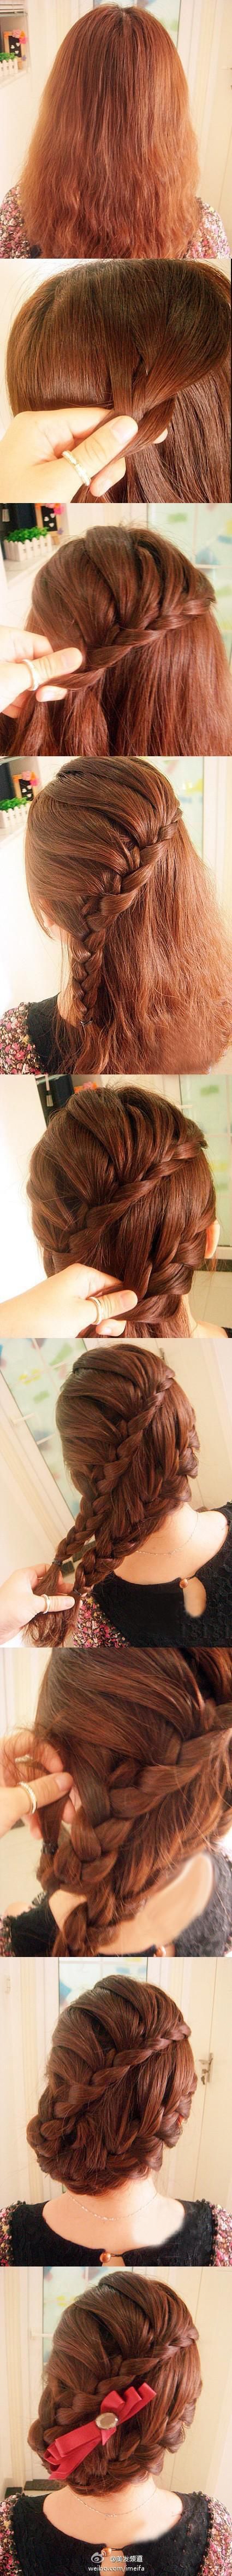 Step By Step Best Party Wear Hairstyles Tutorial Looks & Ideas with Pictures (3)